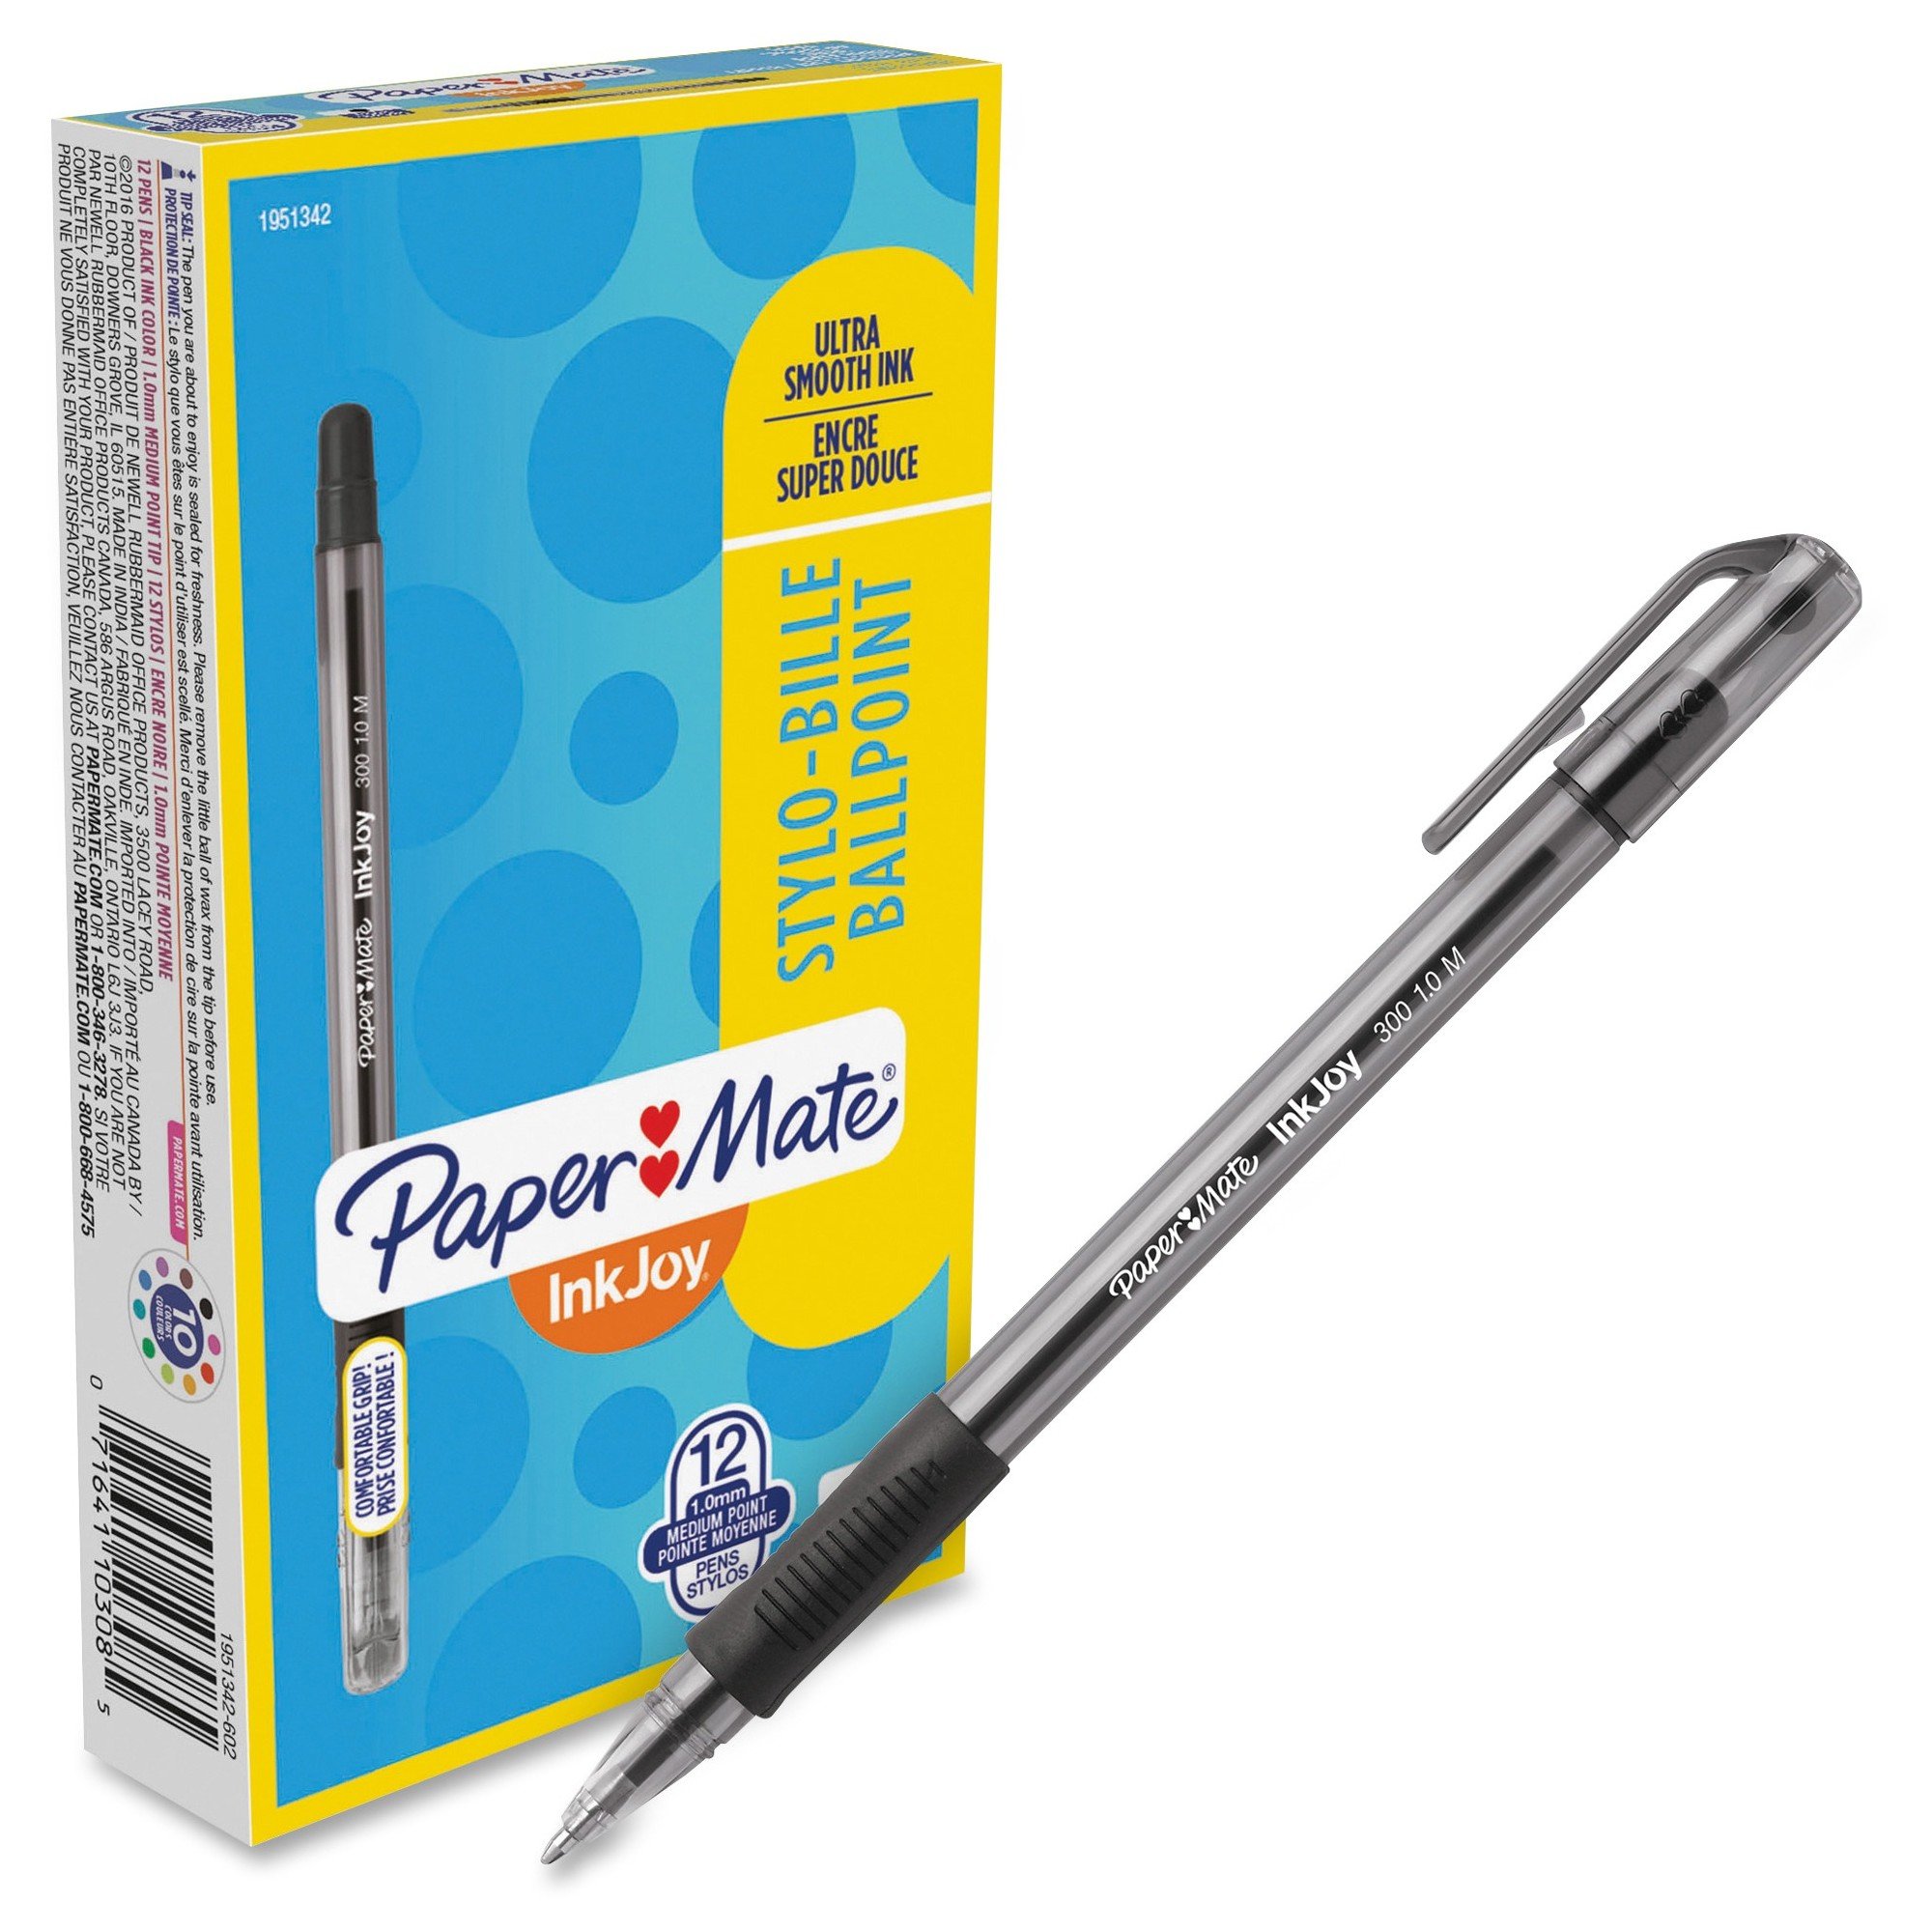 Paper Mate Inkjoy 300 Extra-smooth Ballpoint Pens - 12/Pack